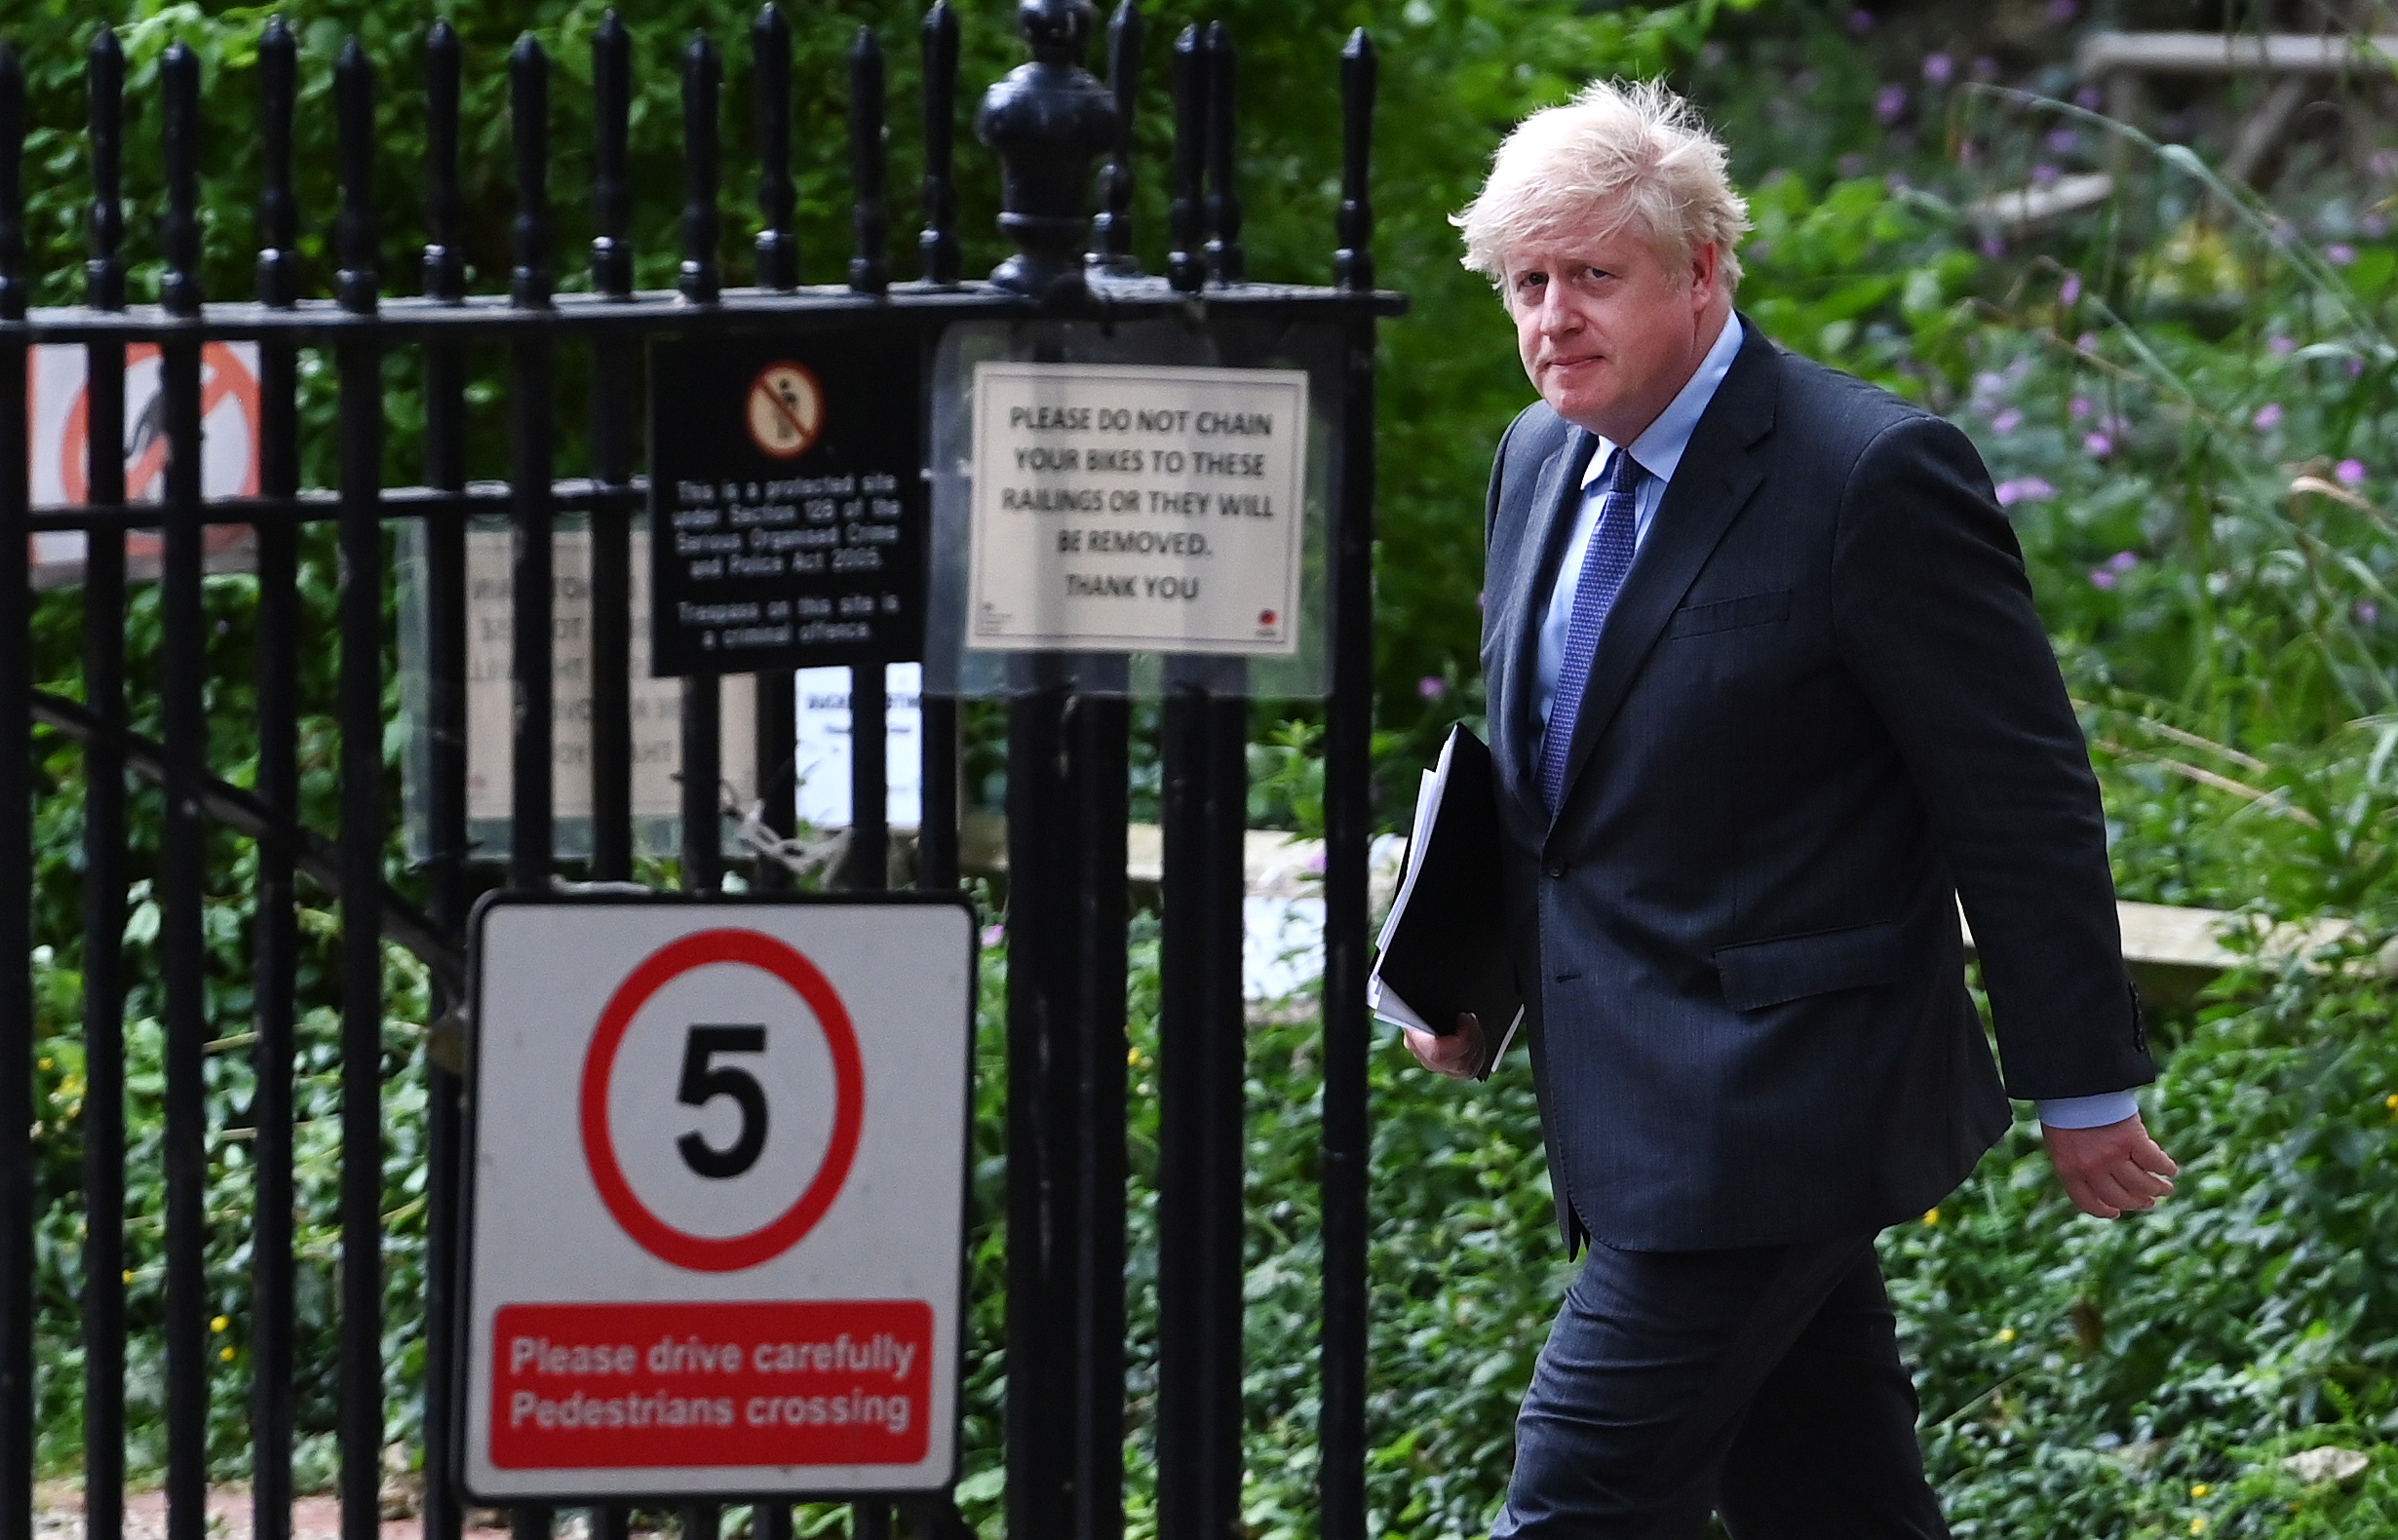 epa09271590 British Prime Minister Boris Johnson at 10 Downing Street following his press conference in London, Britain, 14 June 2021. British Prime Minister Johnson announced a month delay to lockdown easing regulations. The UK government is to delay for a further four weeks to full reopening due to a significant rise in Delta variant Covid-19 cases across England.  EPA/ANDY RAIN